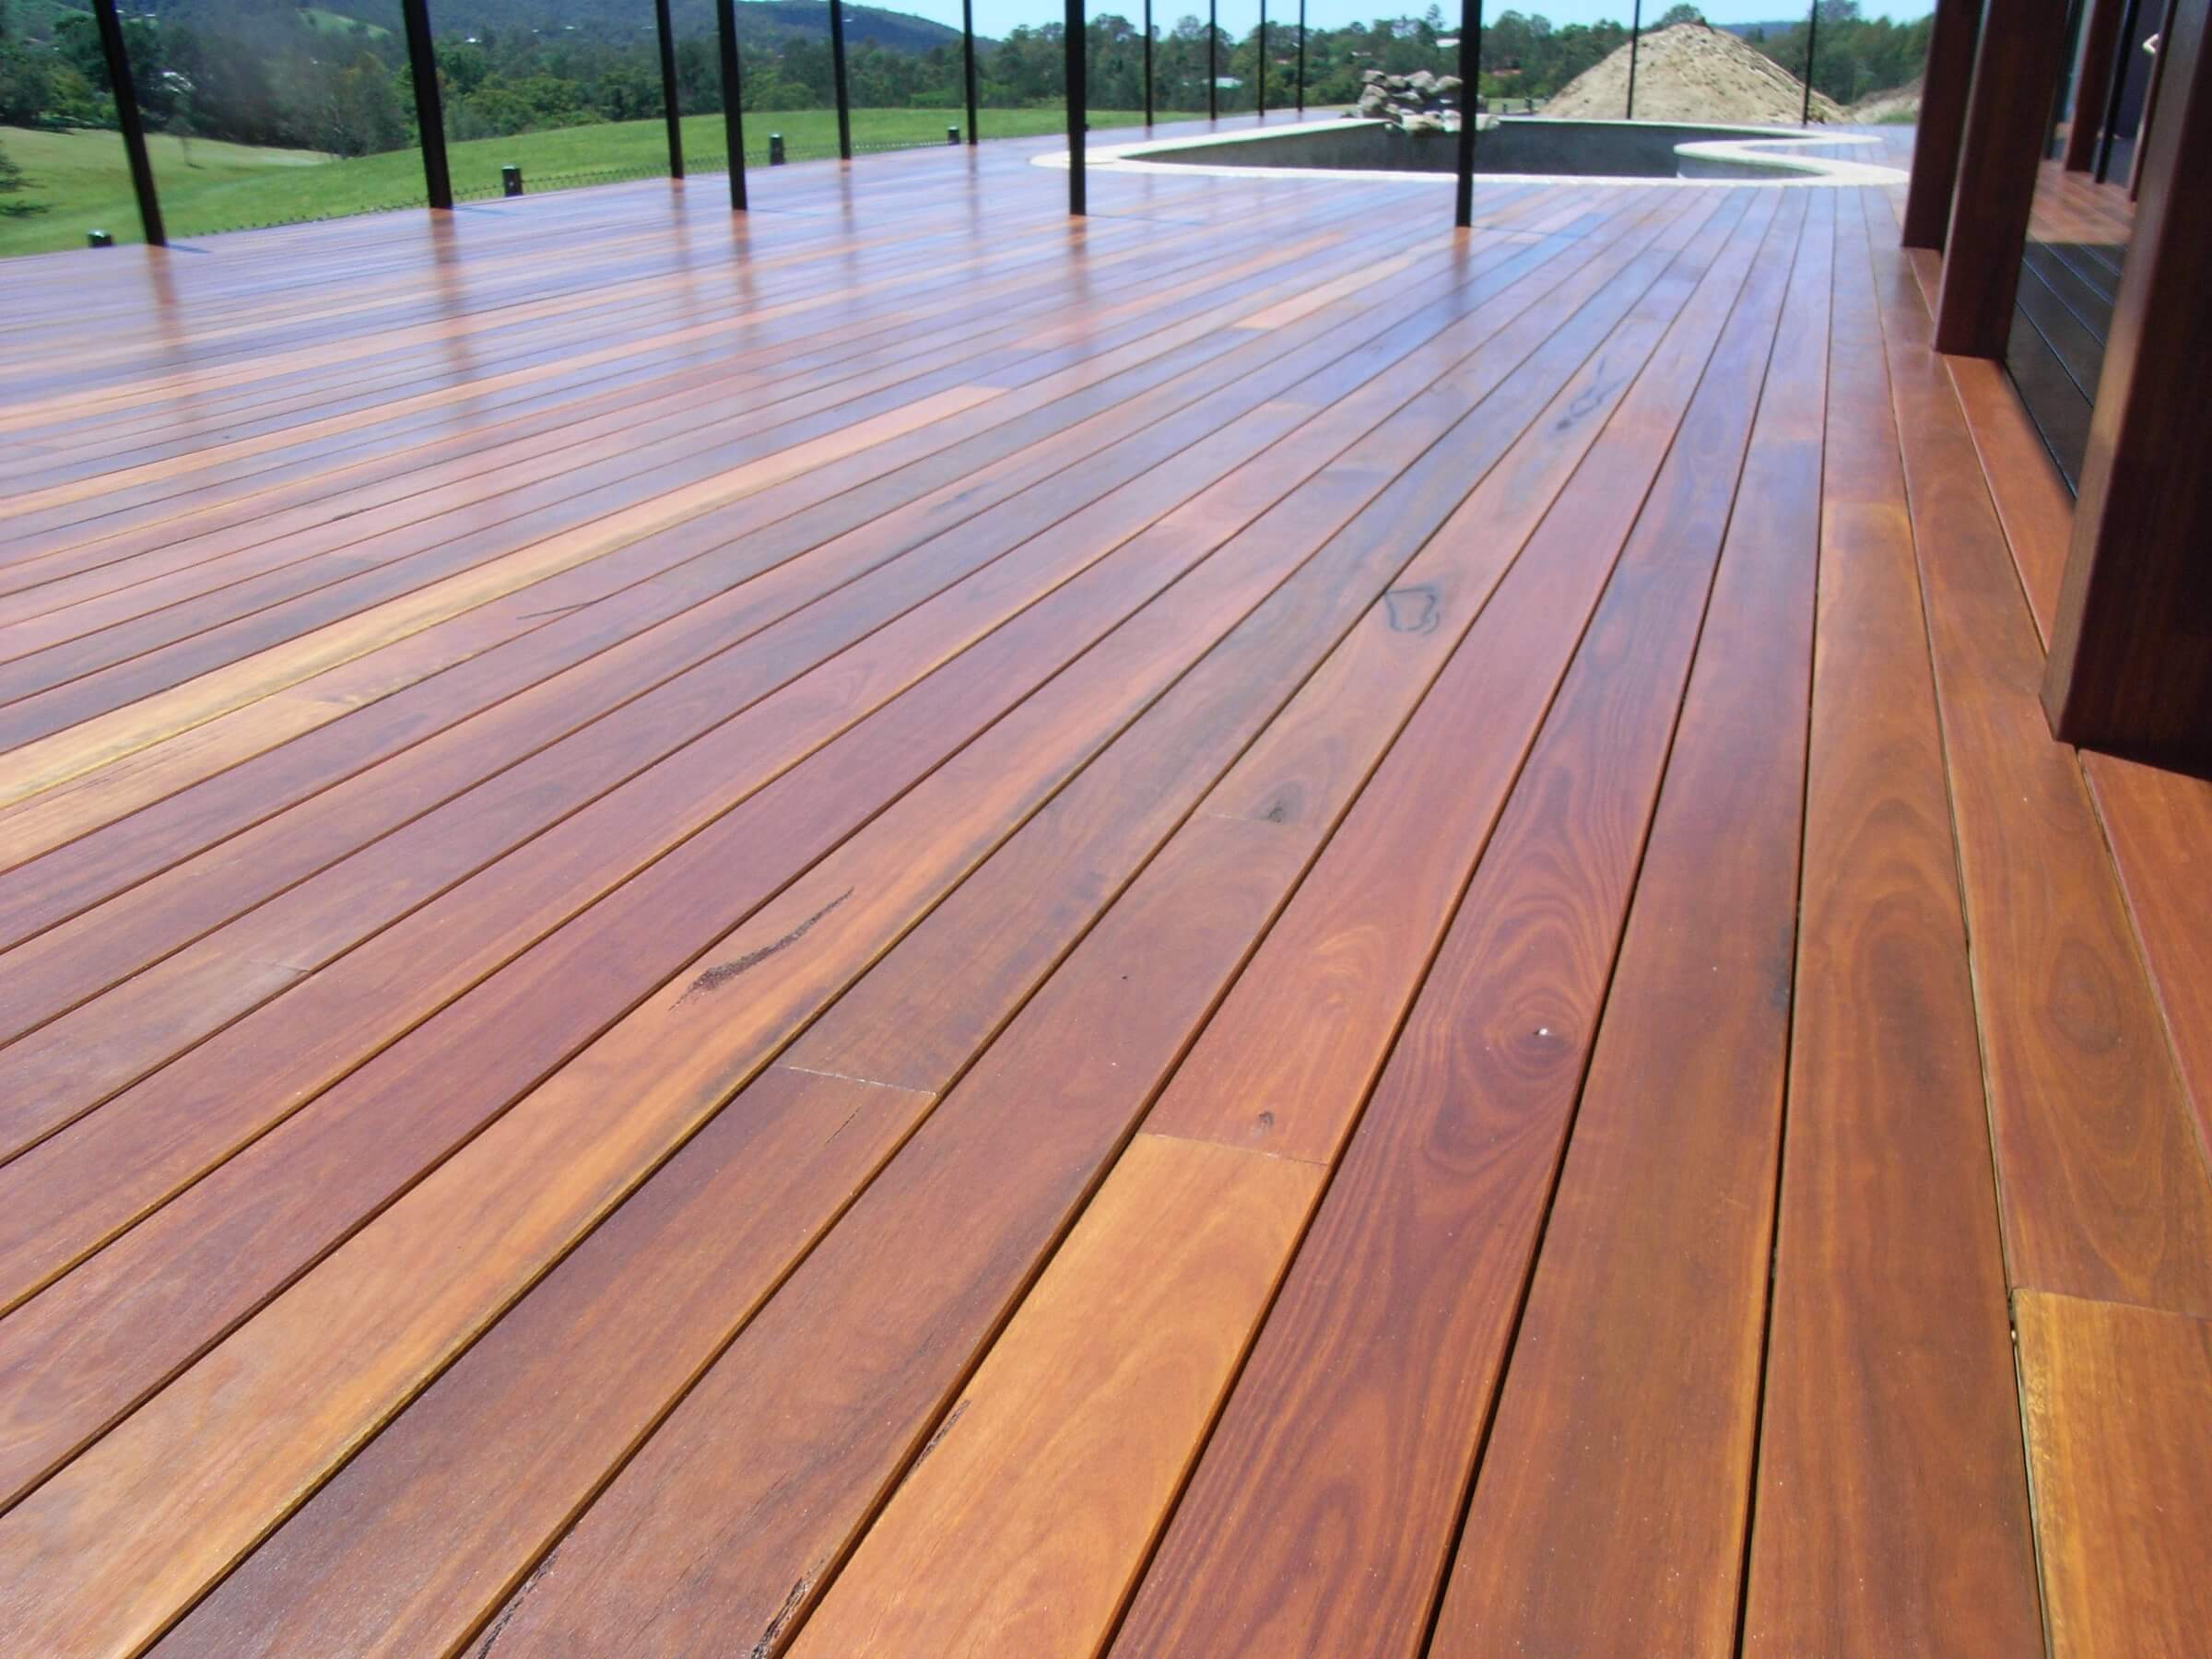 Deck-Max Spotted Gum decking solution